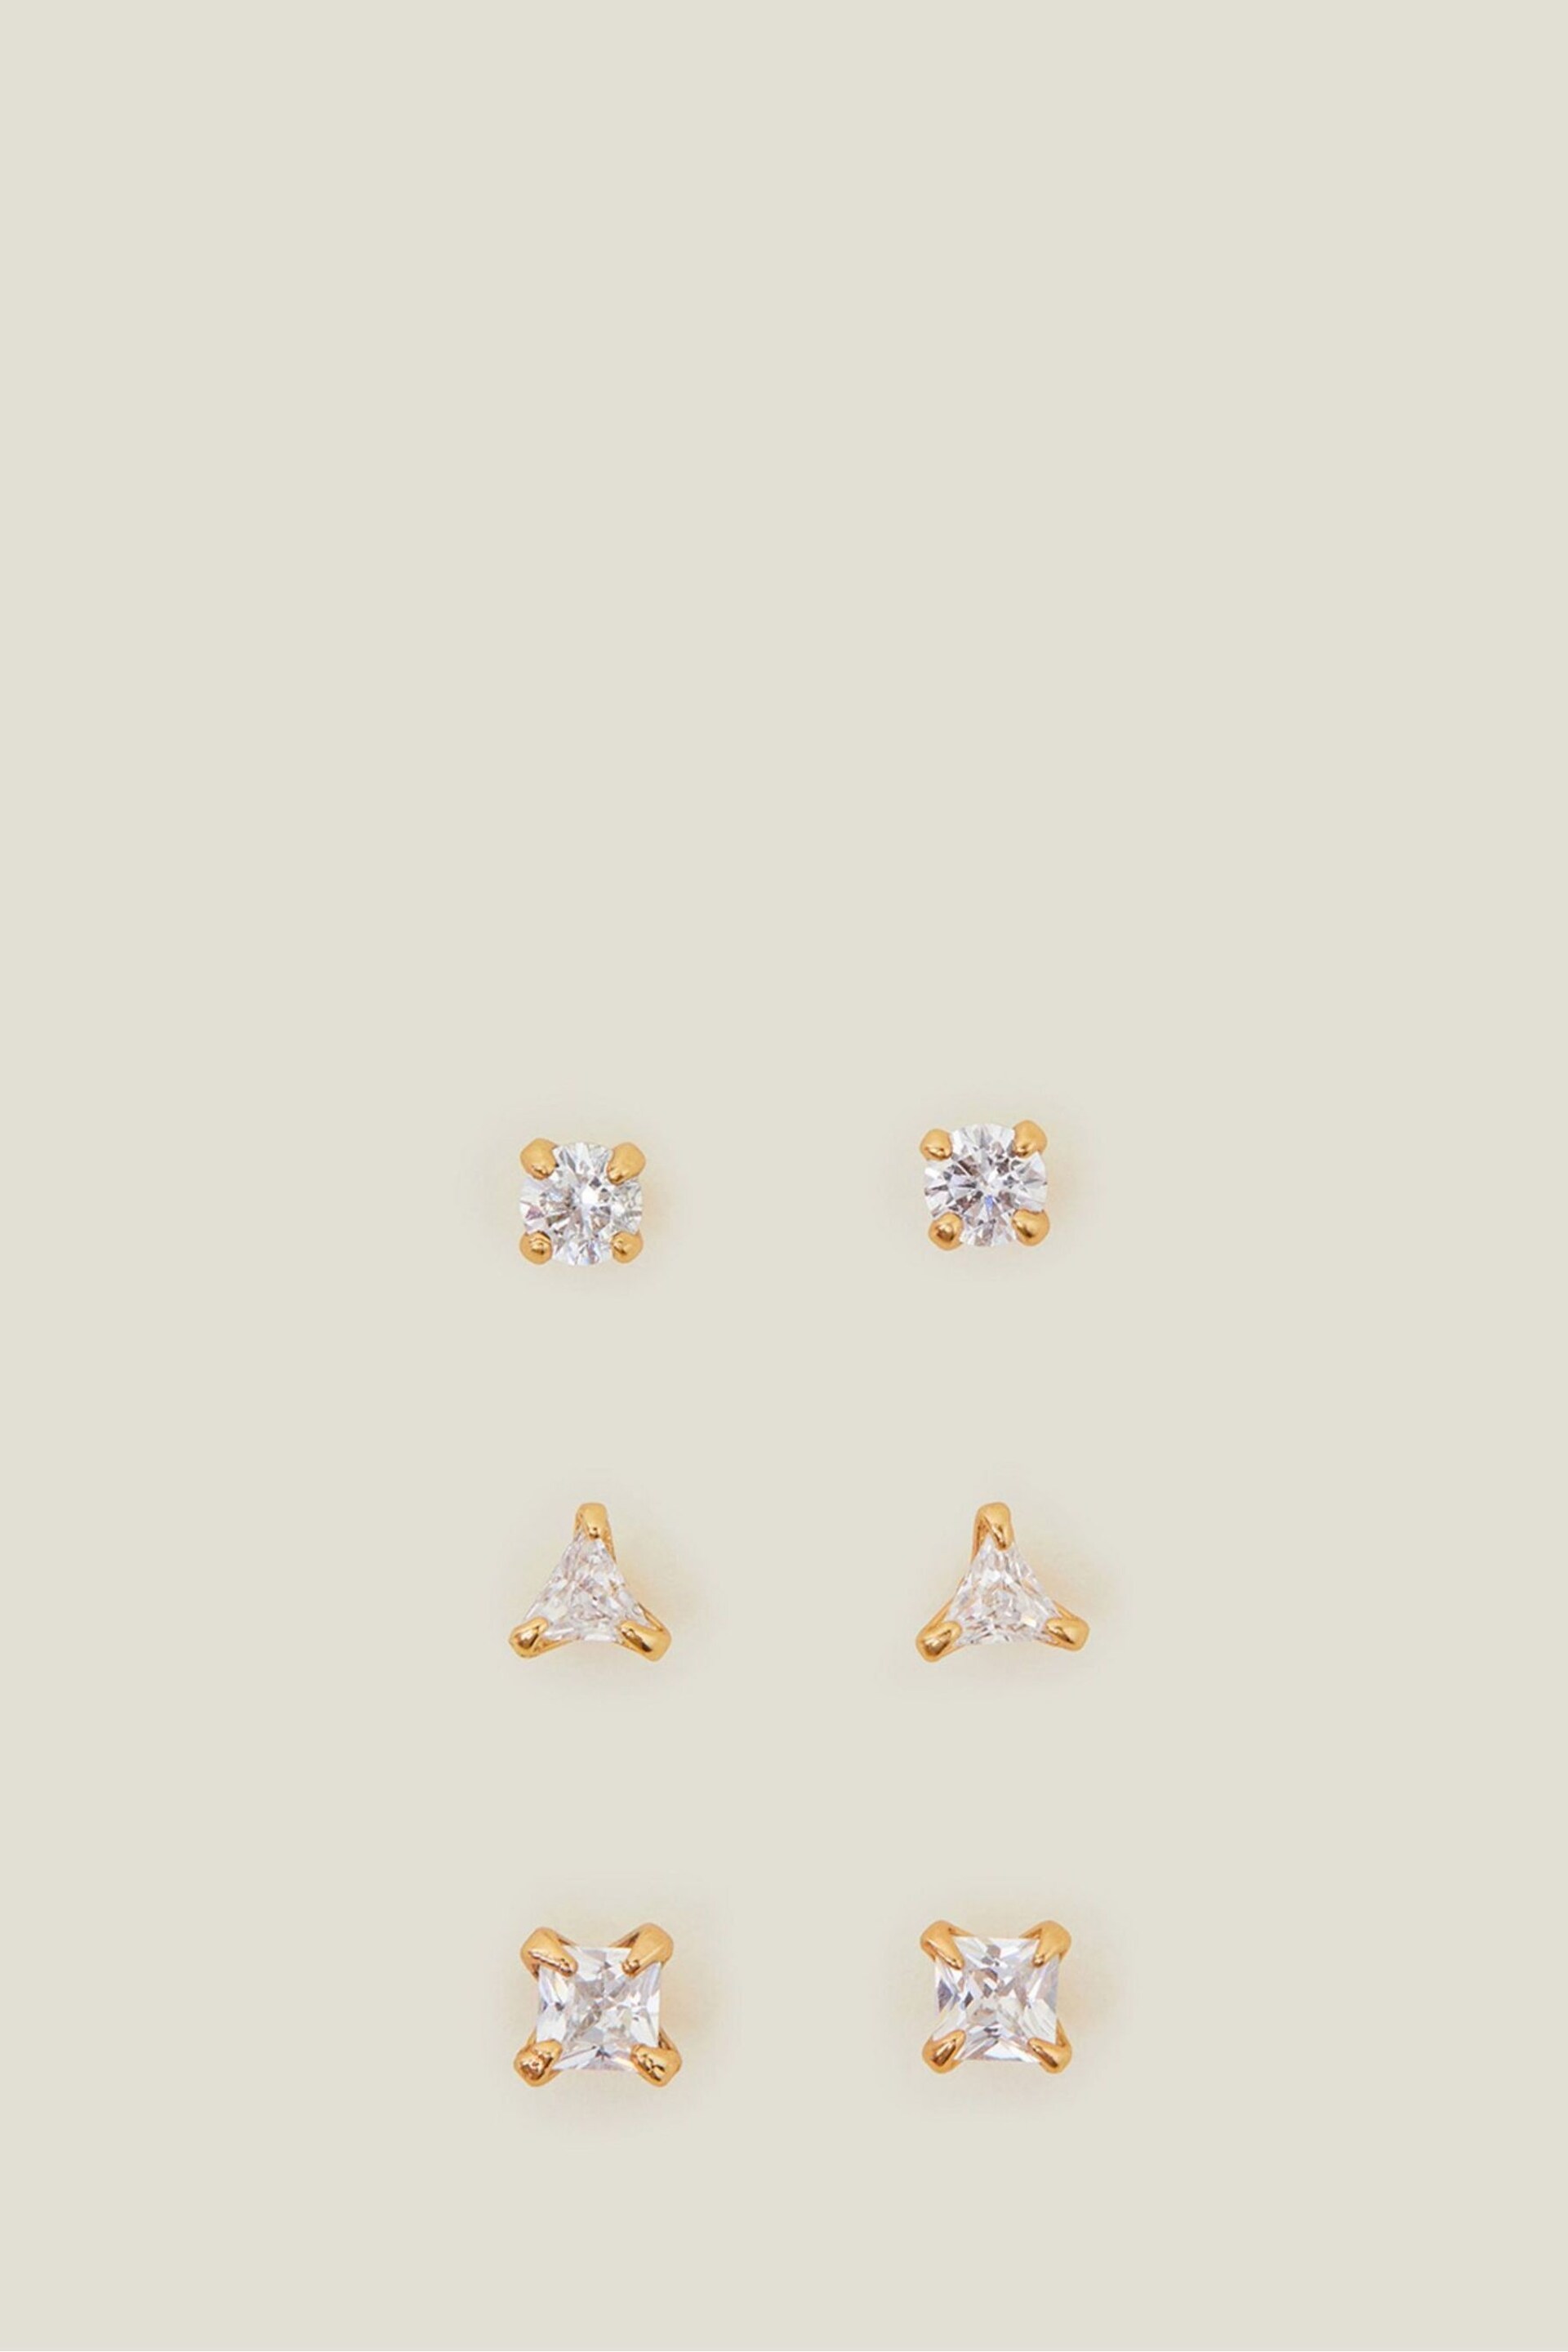 Accessorize 14ct Gold Plated Tone Sparkle Shape Stud Earrings 3 Pack - Image 1 of 3